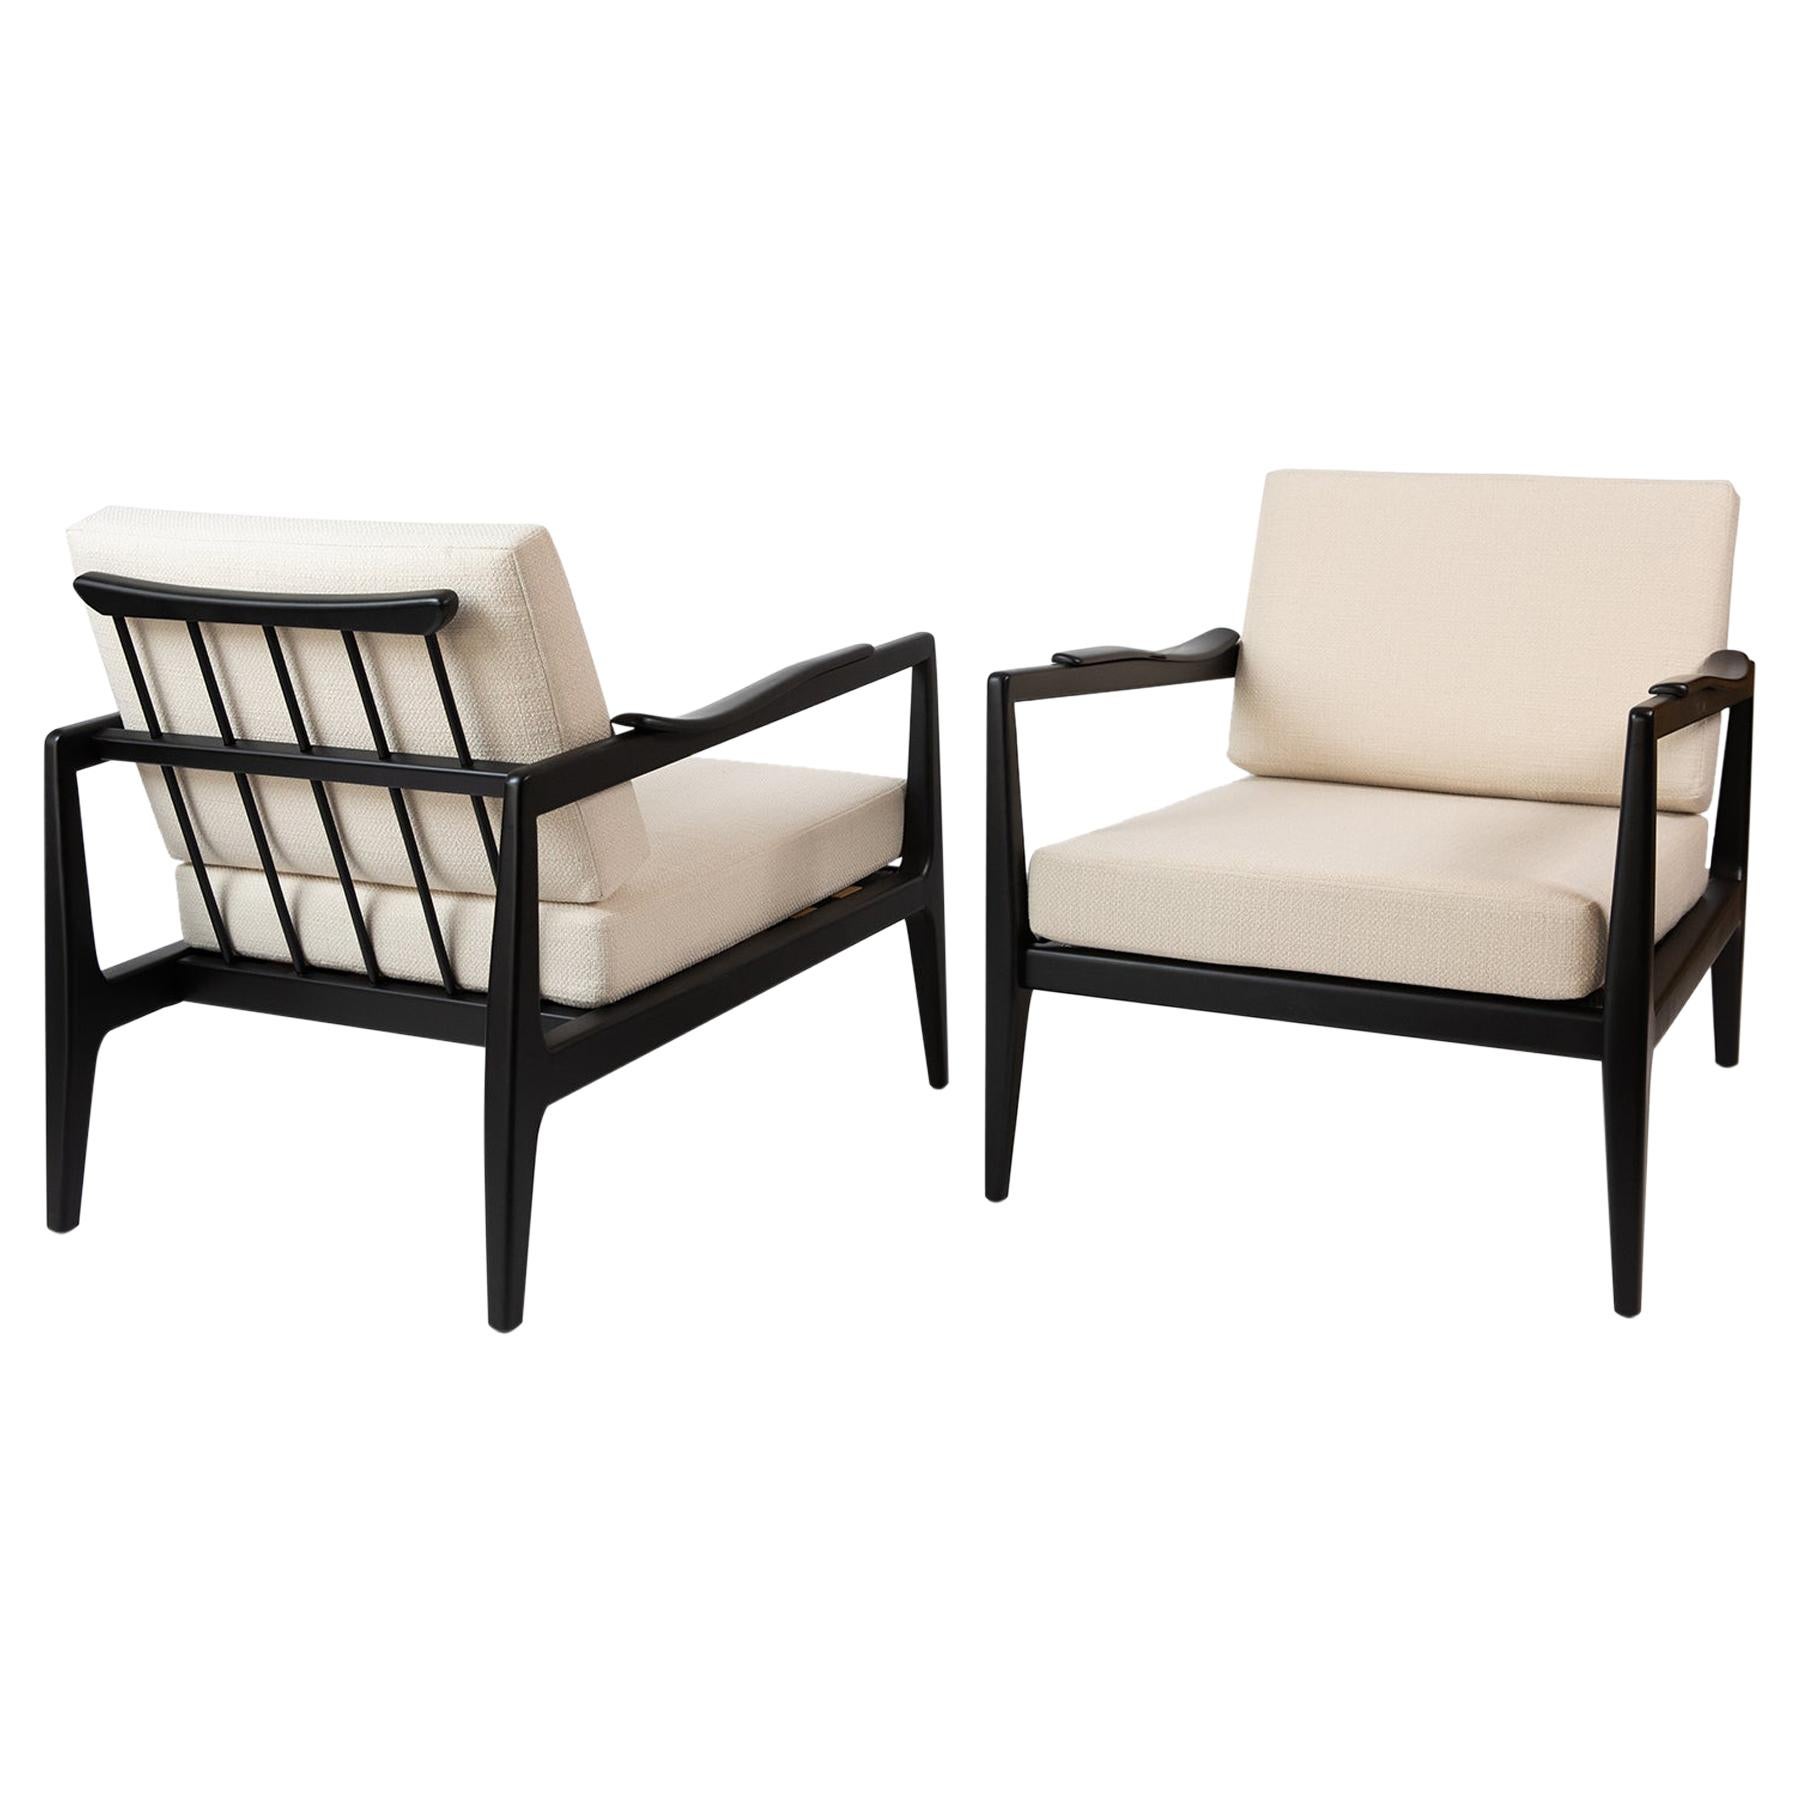 Edmond Spence Pair of Ebonized and Upholstered Lounge Chairs